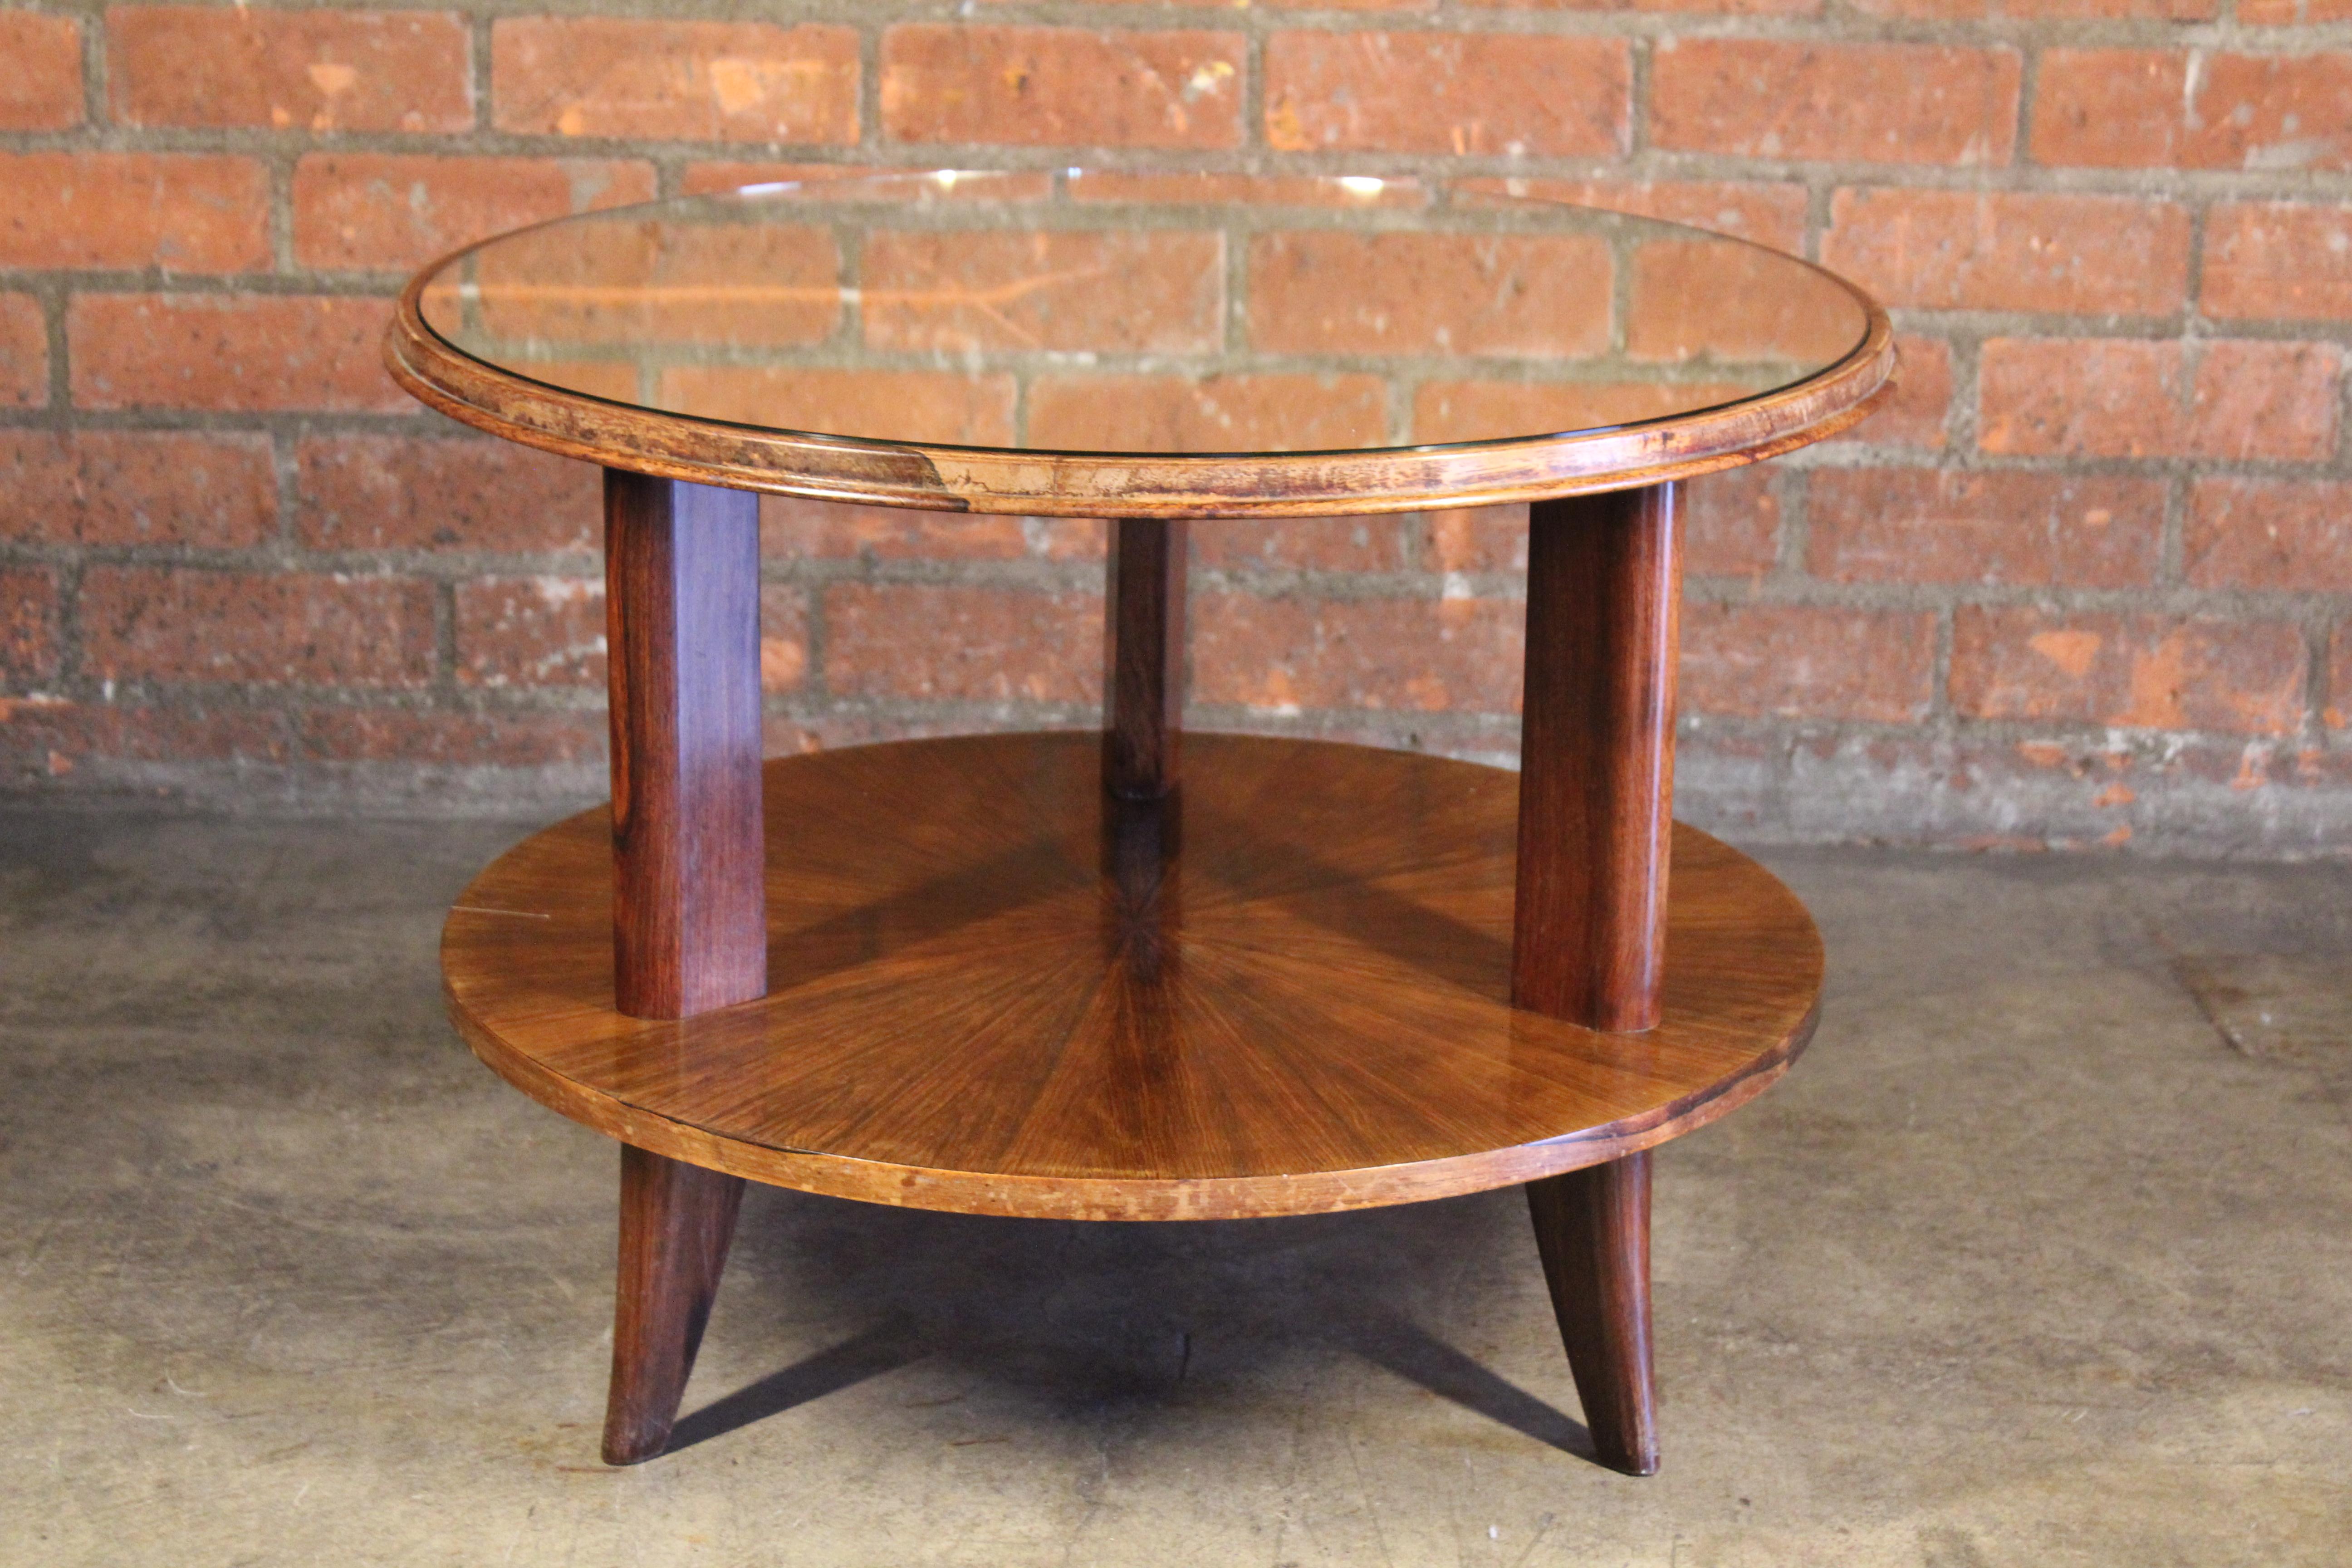 Italian Art Deco Rosewood and Mirror Table Attributed to Paolo Buffa, Italy, 1940s For Sale